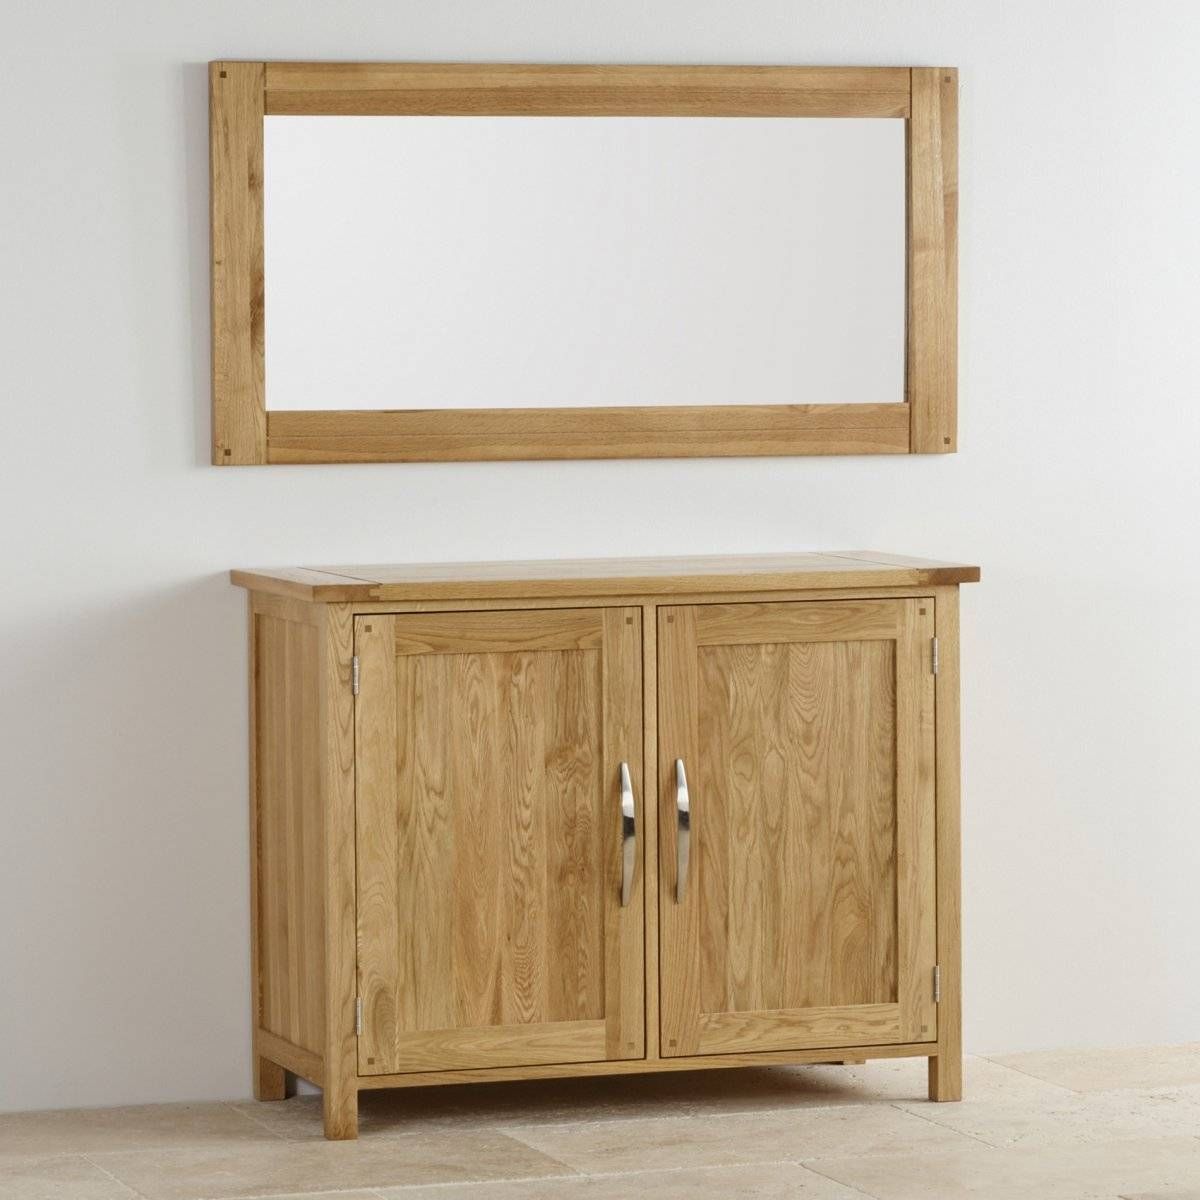 Mirrors | Bring Light To Your Room | Oak Furniture Land With Oak Mirrors (View 1 of 15)